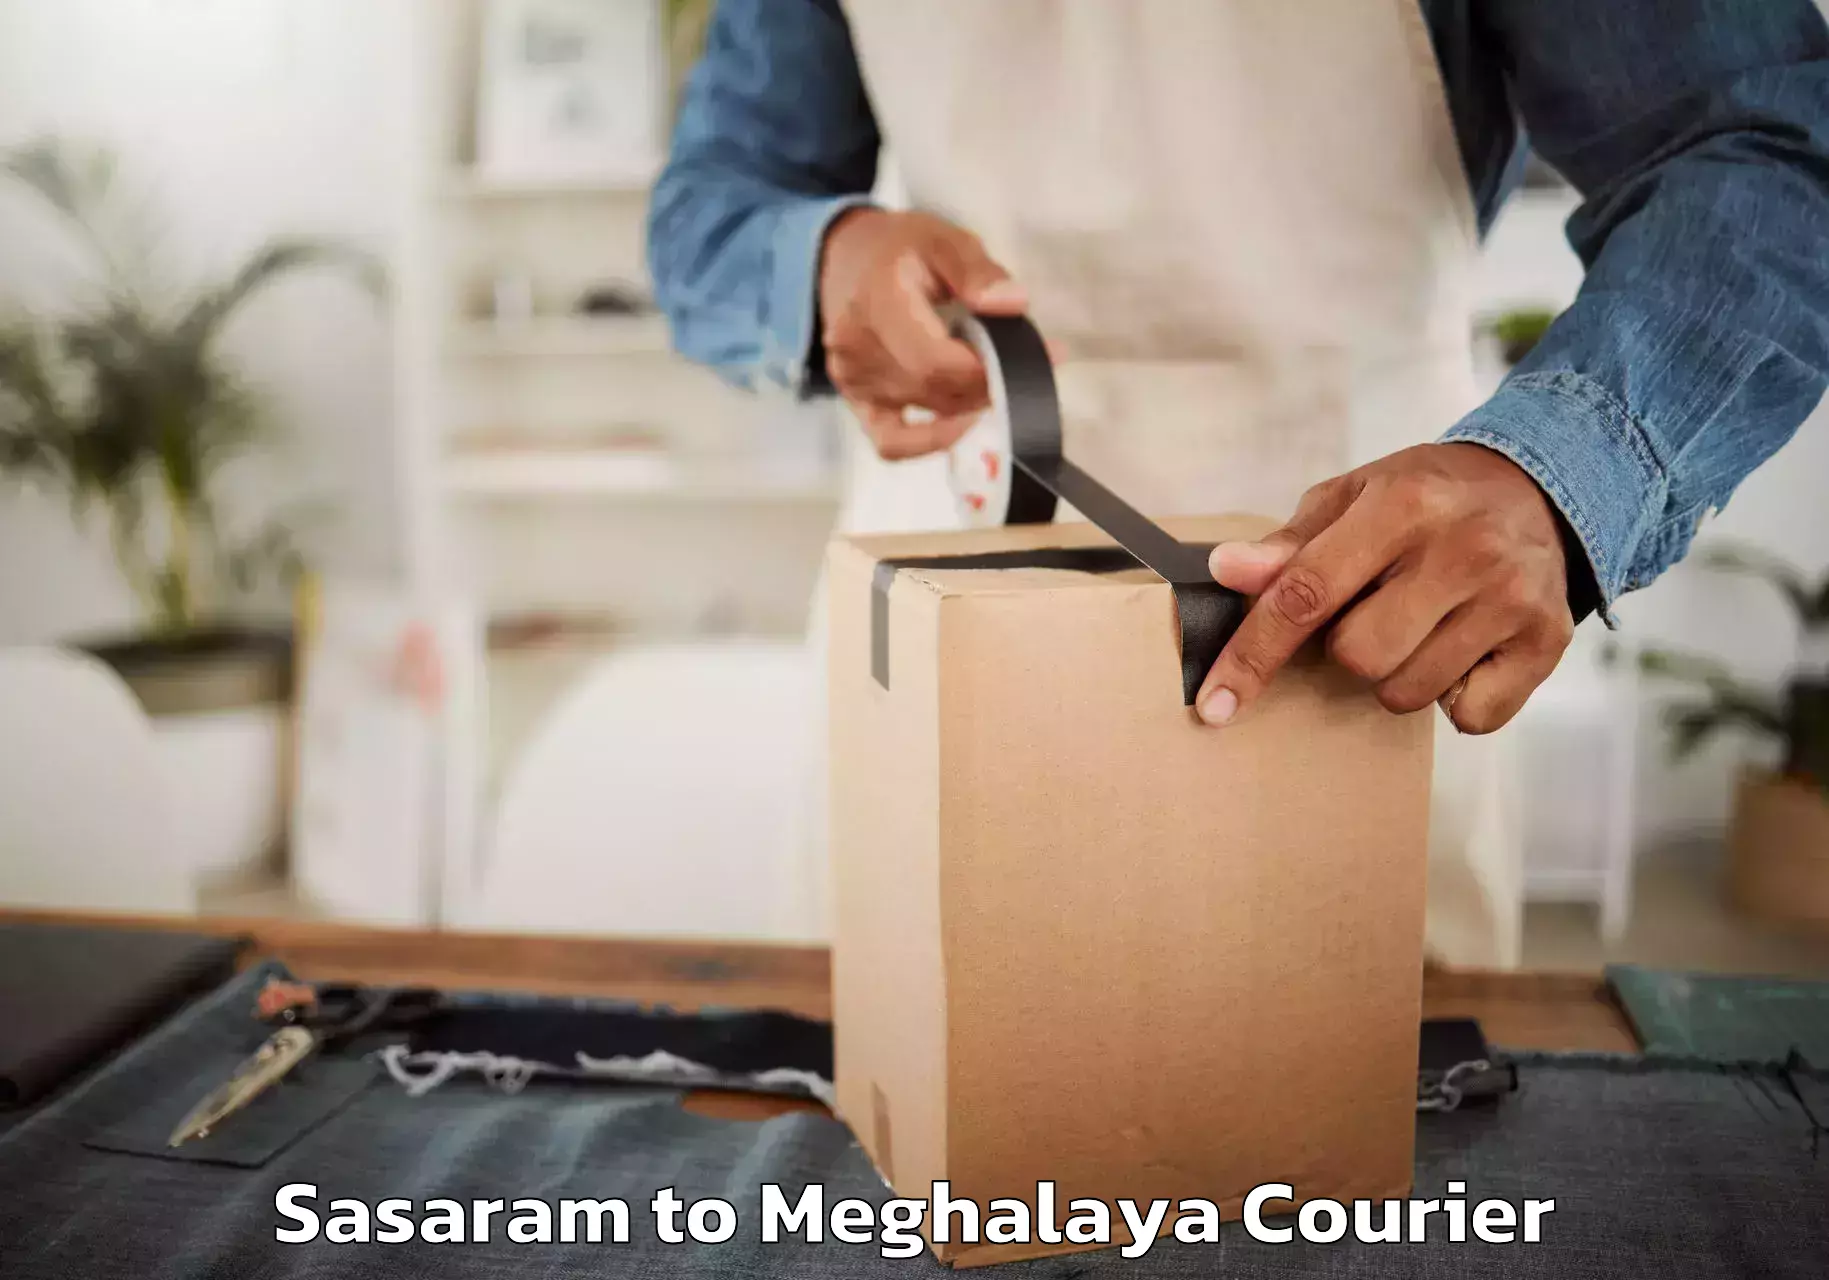 Furniture delivery service in Sasaram to Meghalaya